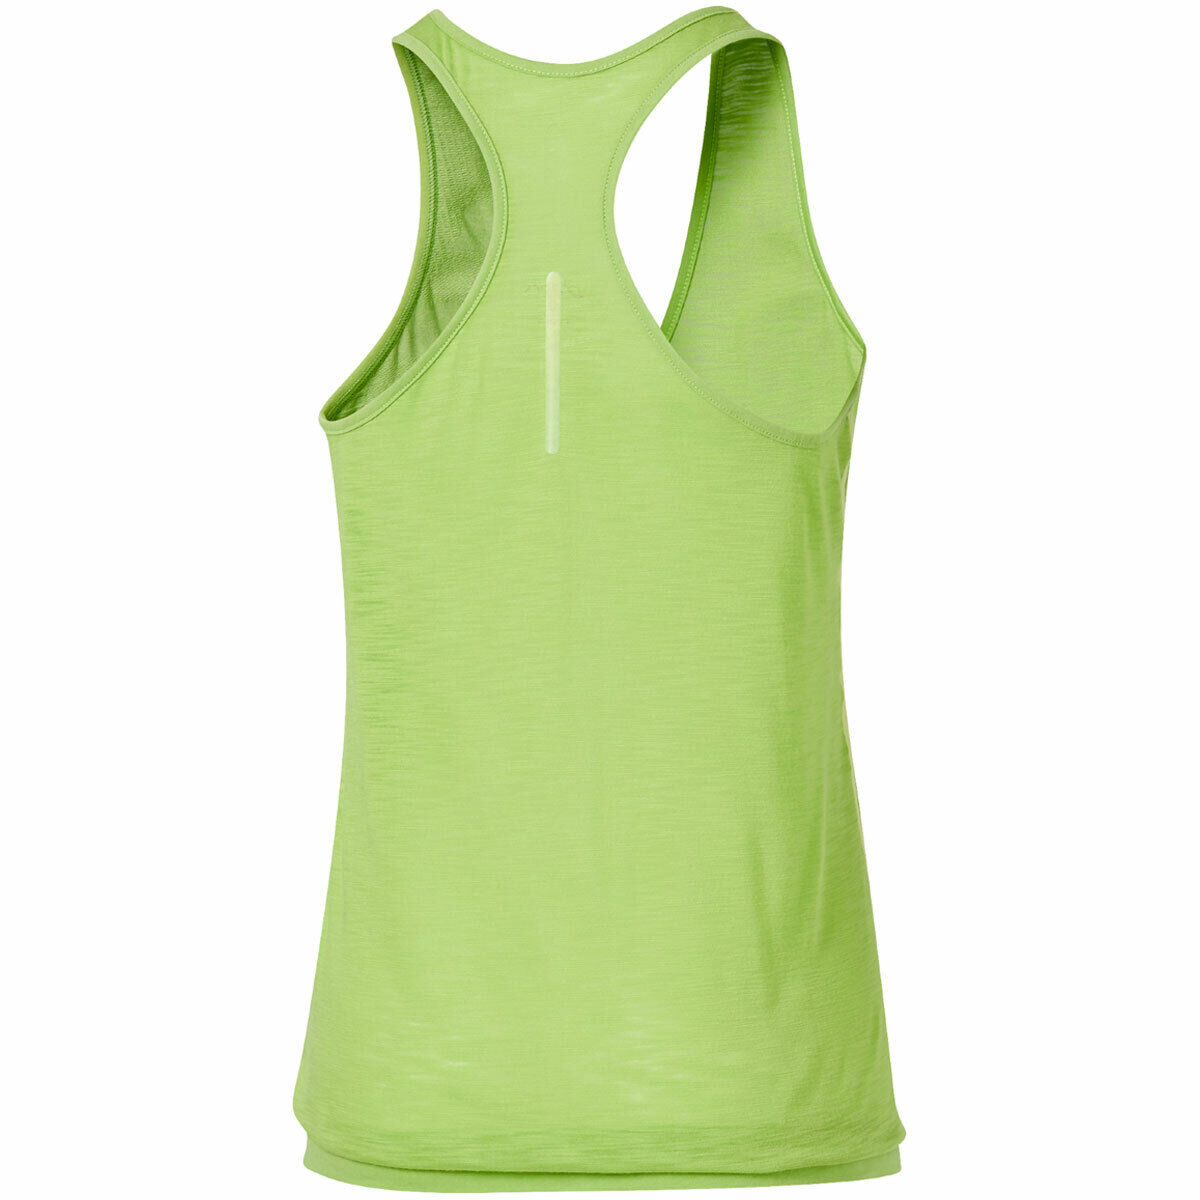 Asics fuzeX TOP Lady 129971-0473 Leichtes Running Tank, sehr weiches Material